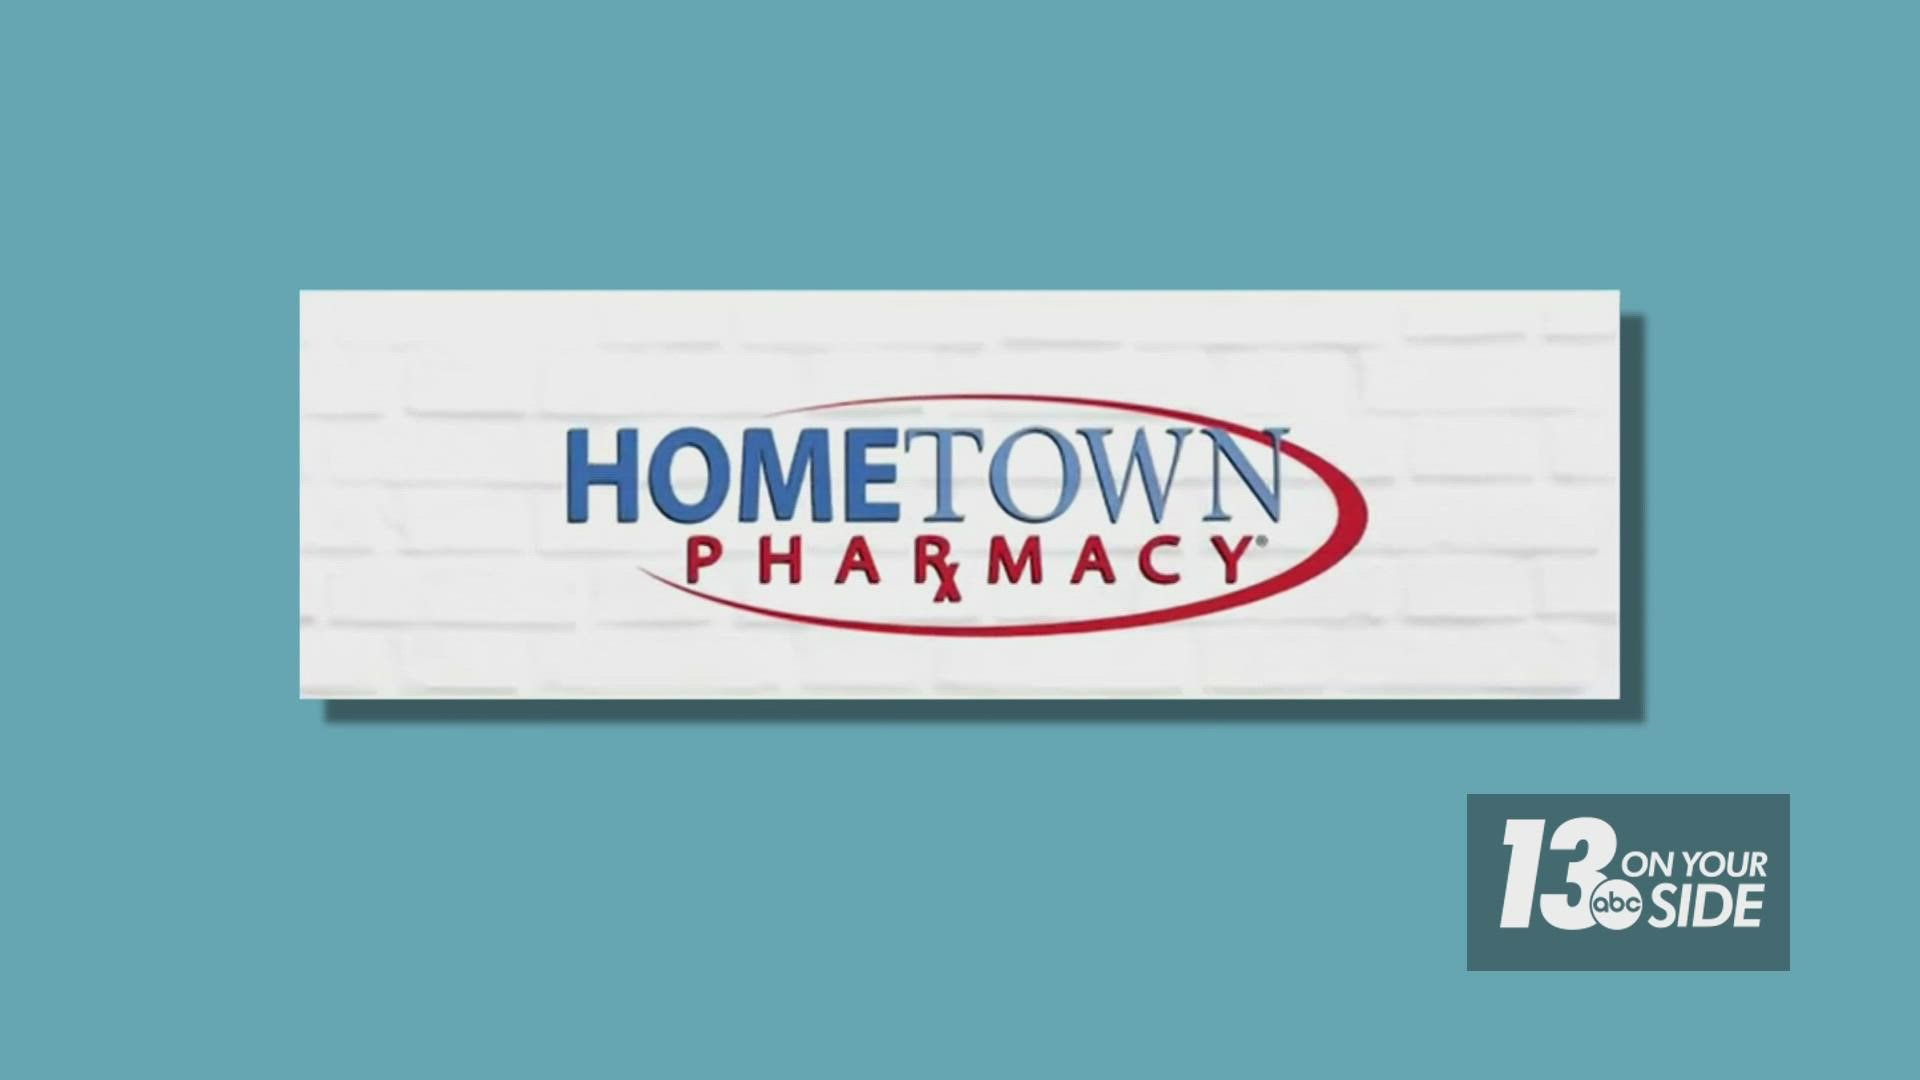 The team at HomeTown Pharmacy is keyed-in to your functional health, believing that’s the way to help you feel your best.